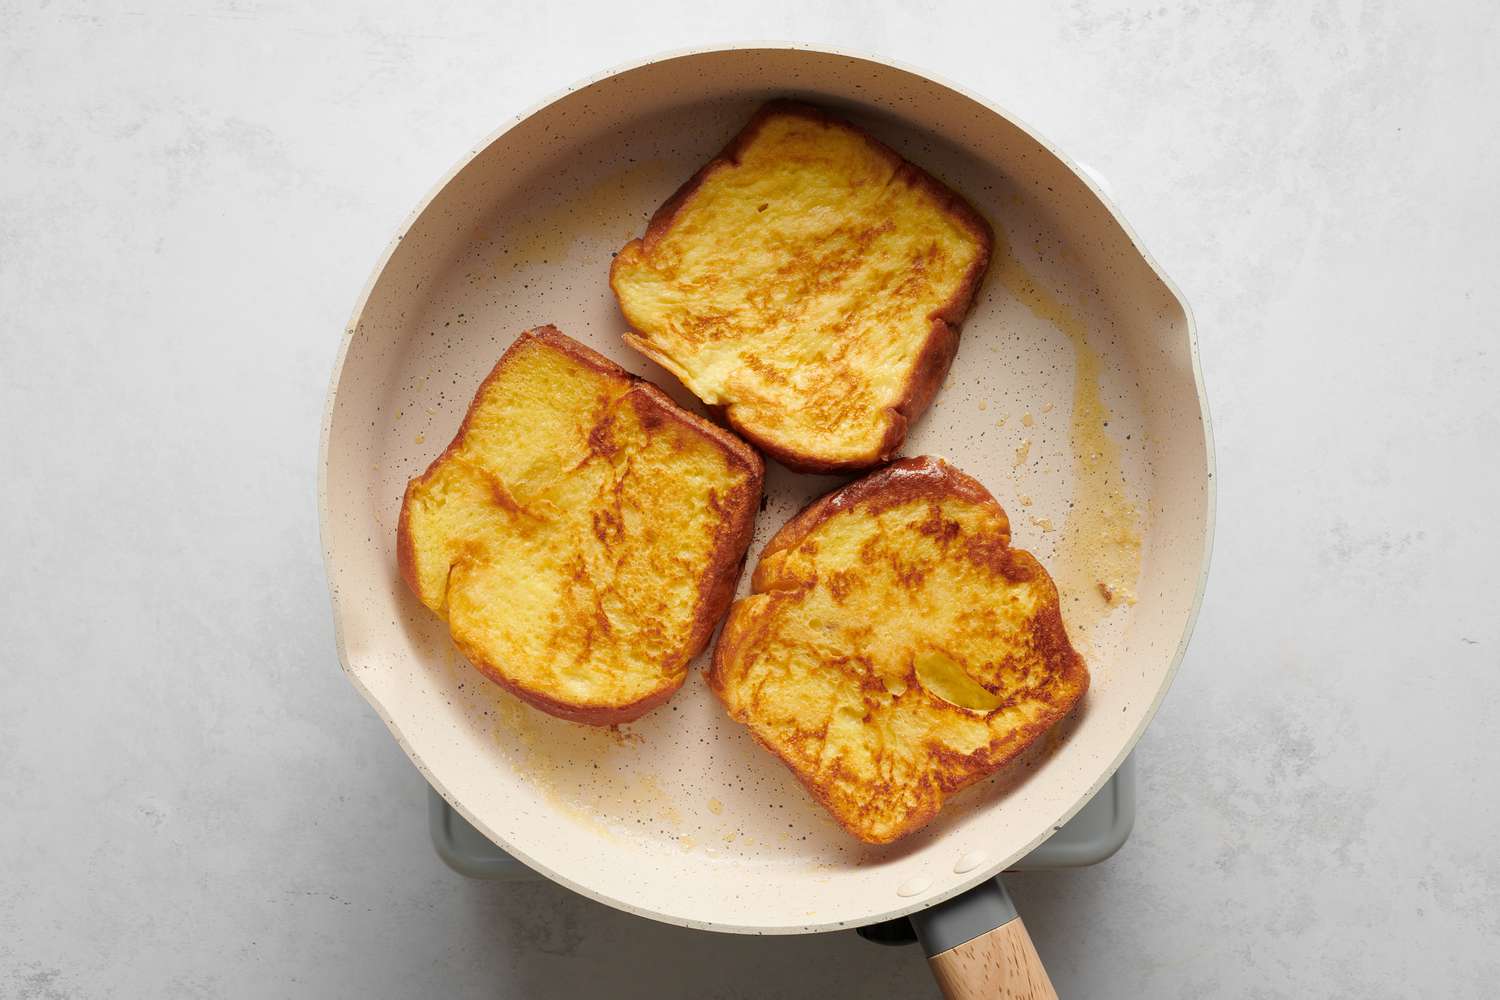 Three pieces of French toast cooking in a pan